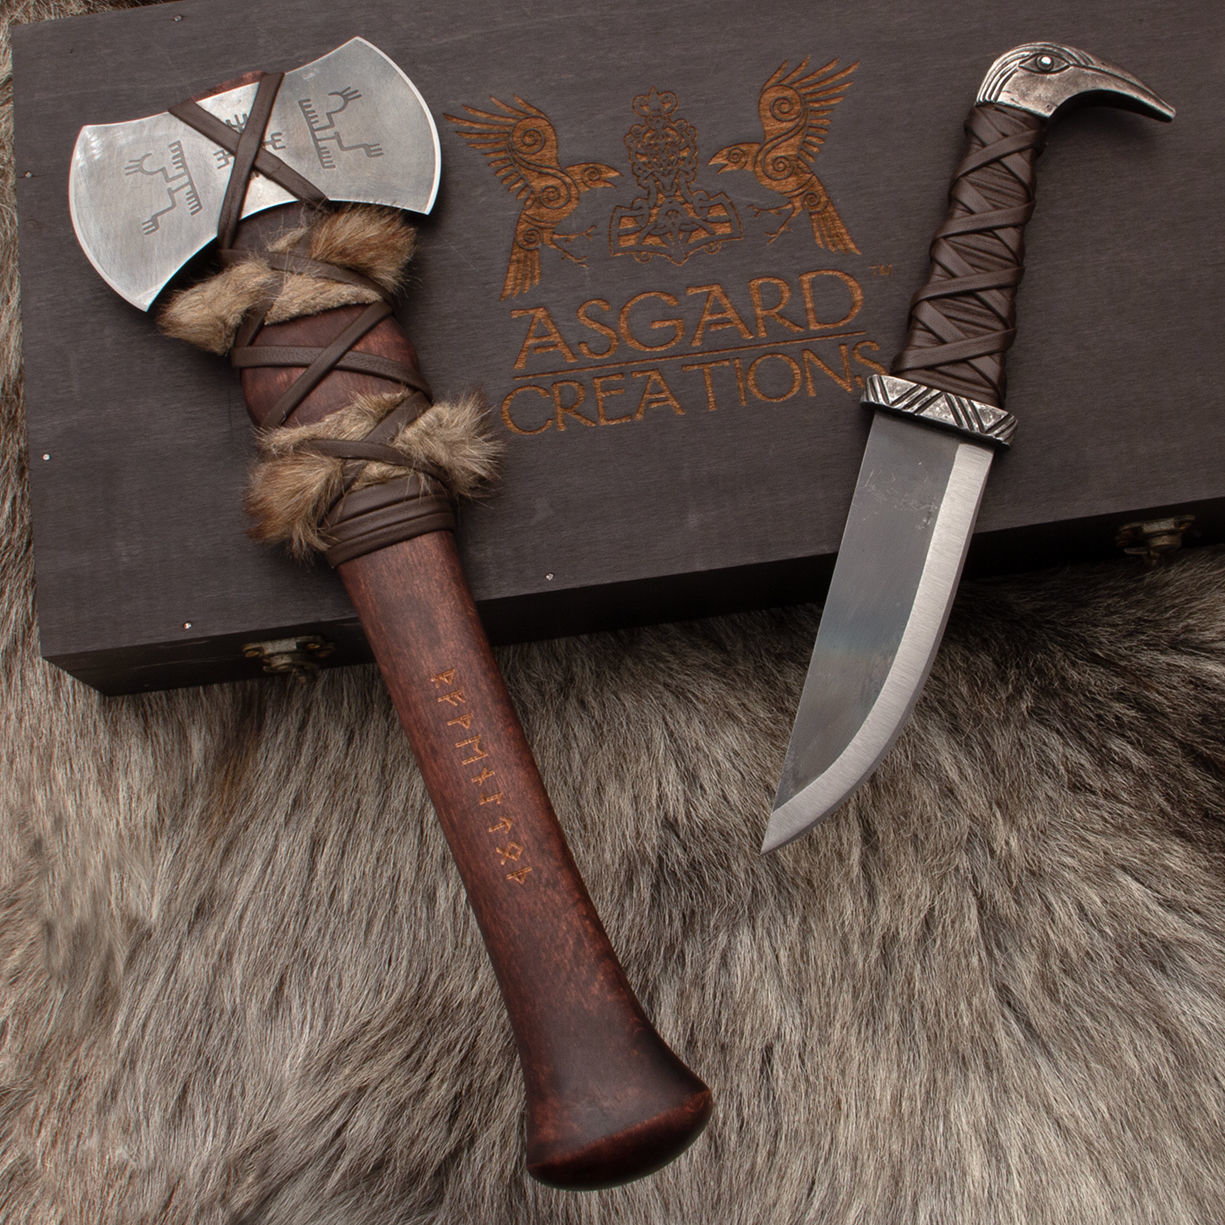 Asgard Creations Axe & Knife Boxed Set of Viking belt tools made by Windlass Steelcrafts